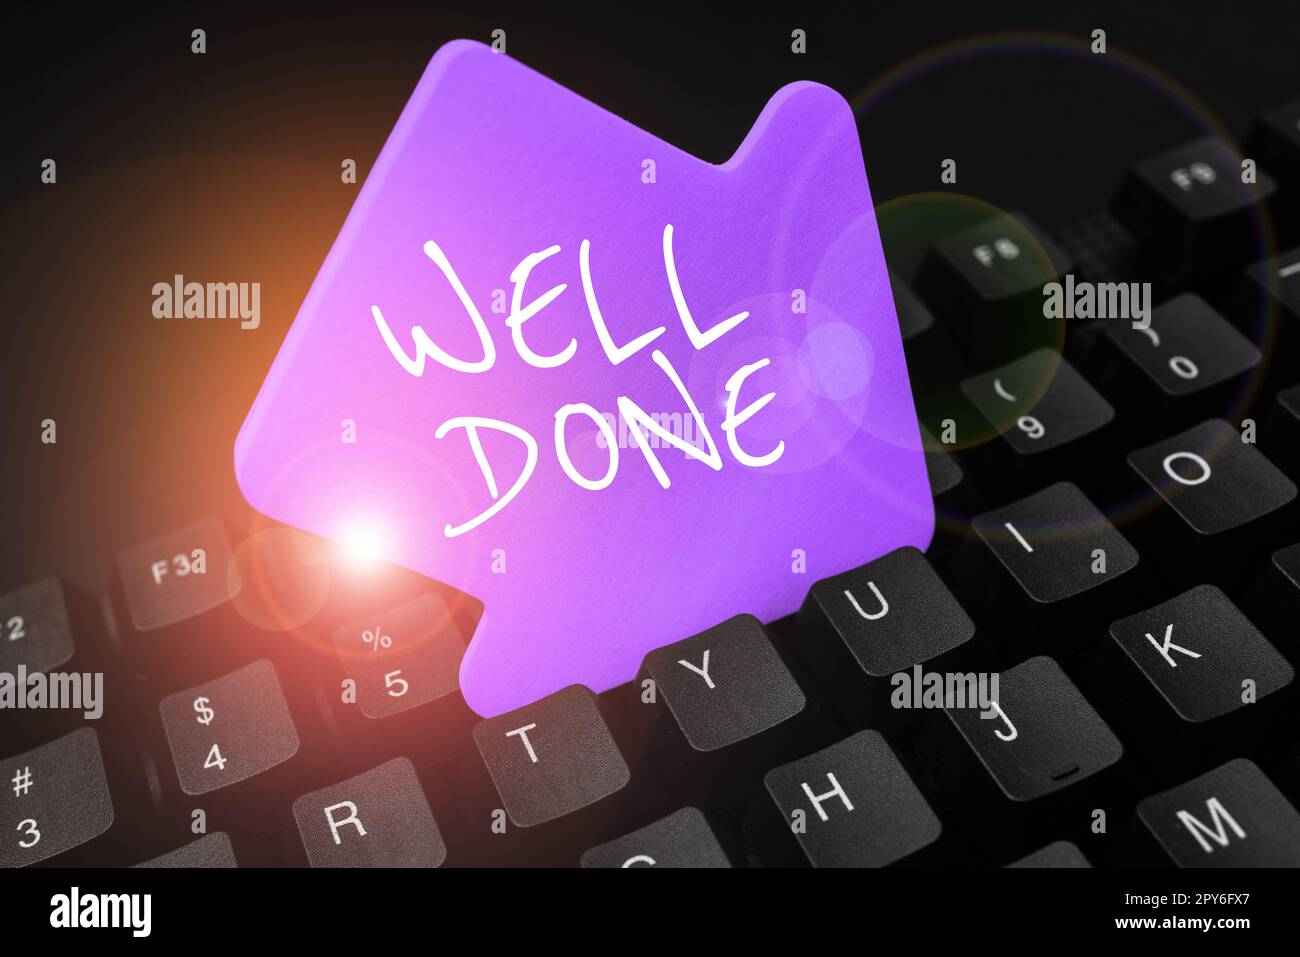 Text sign showing Well Done. Business idea Peform accurately and diligently with skill and efficiently Stock Photo